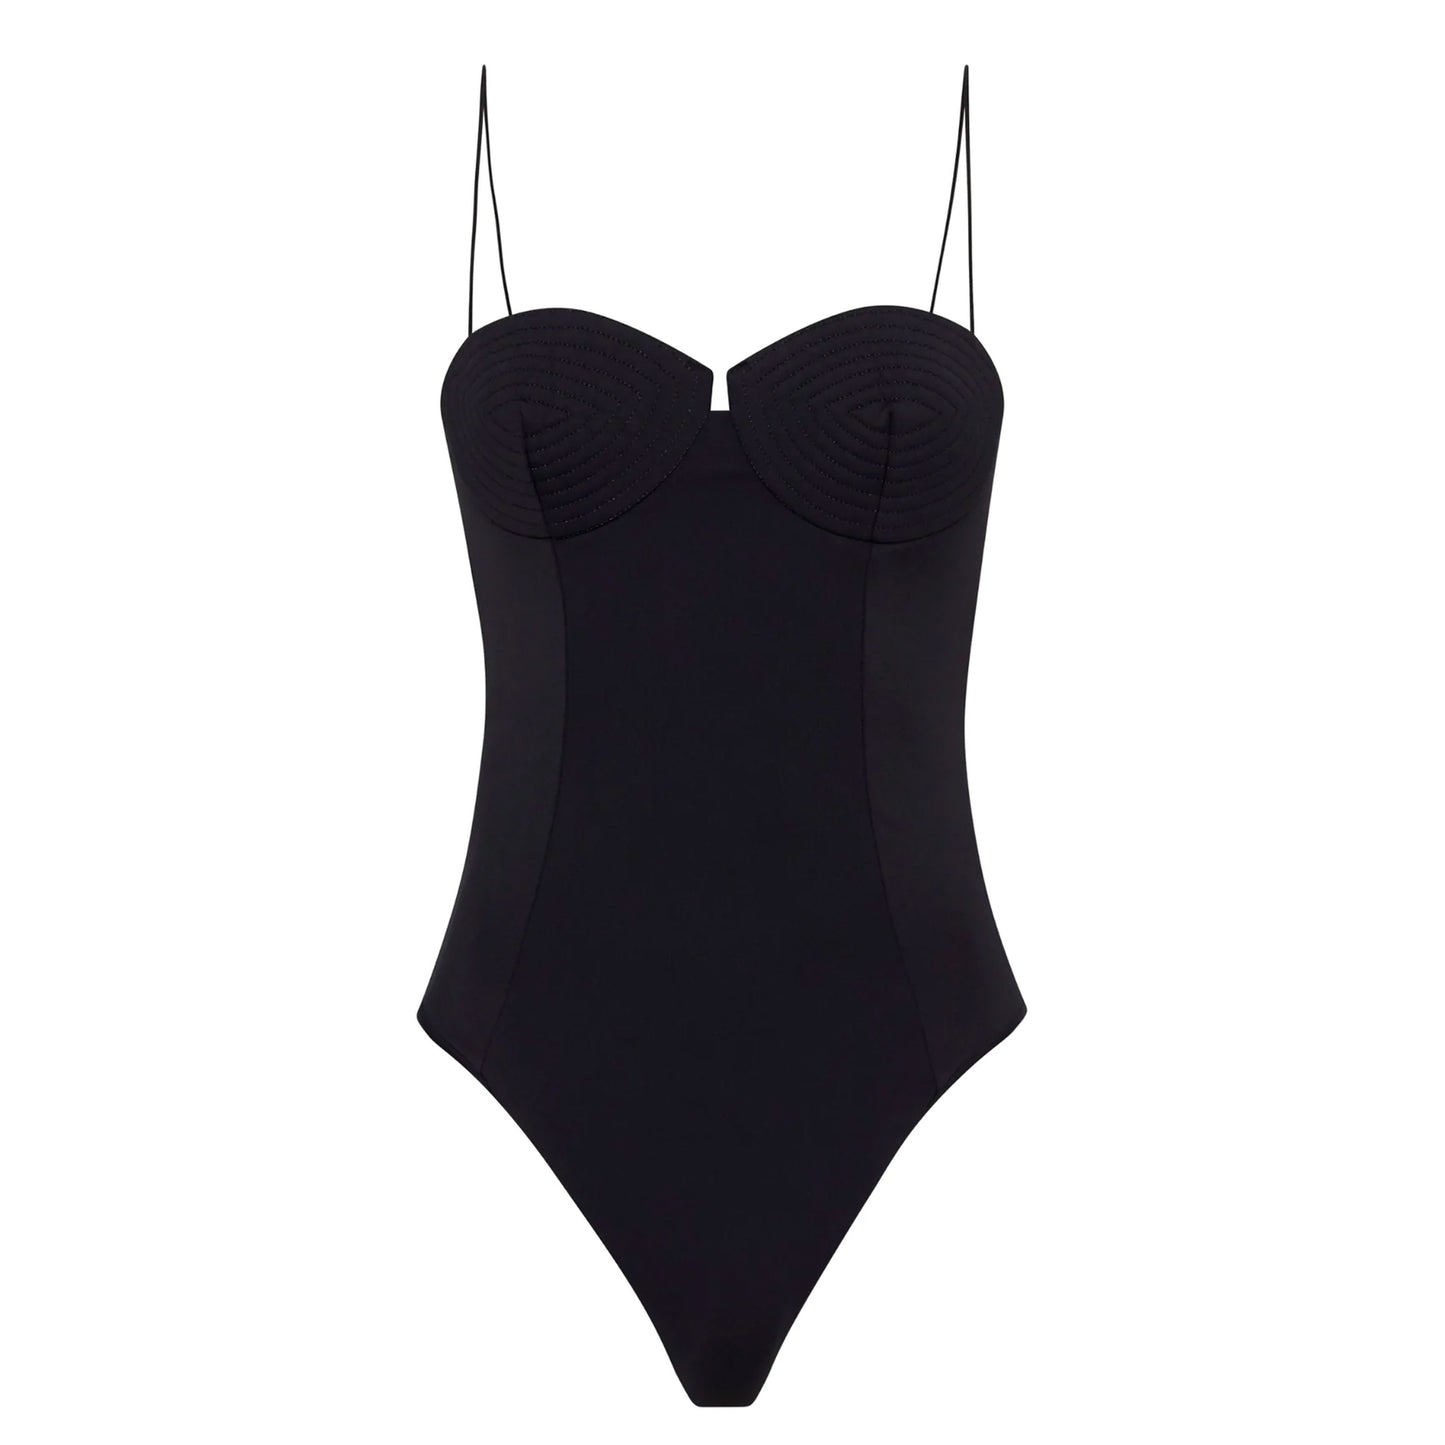 Ziah Madonna Swimsuit - NWT